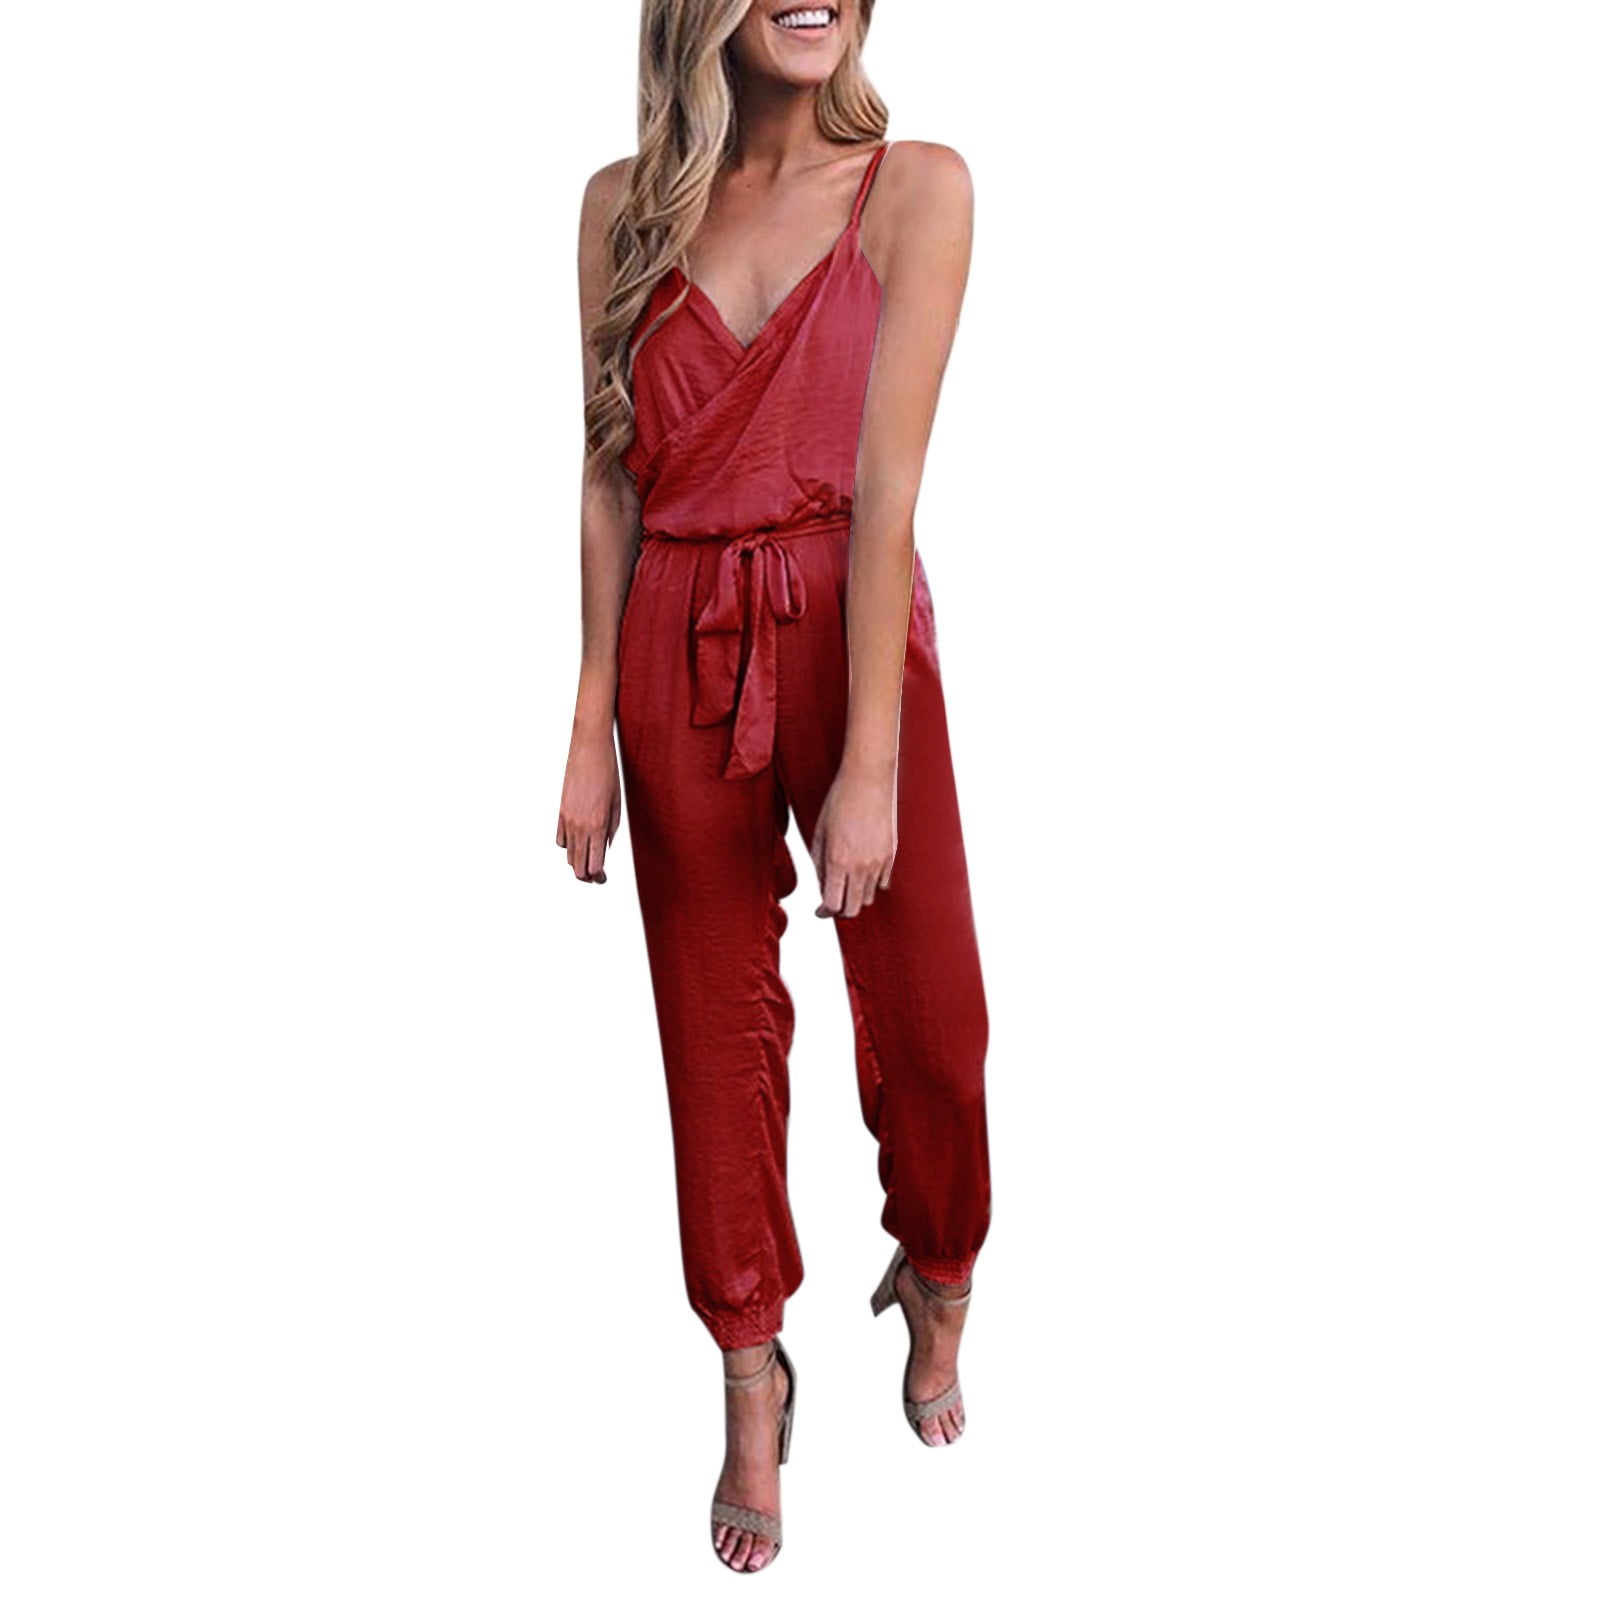 Women's Casual Solid Pocket Strap Jumpsuit Jogging Jumpsuit Dressy Rompers  for Women (Red, M)